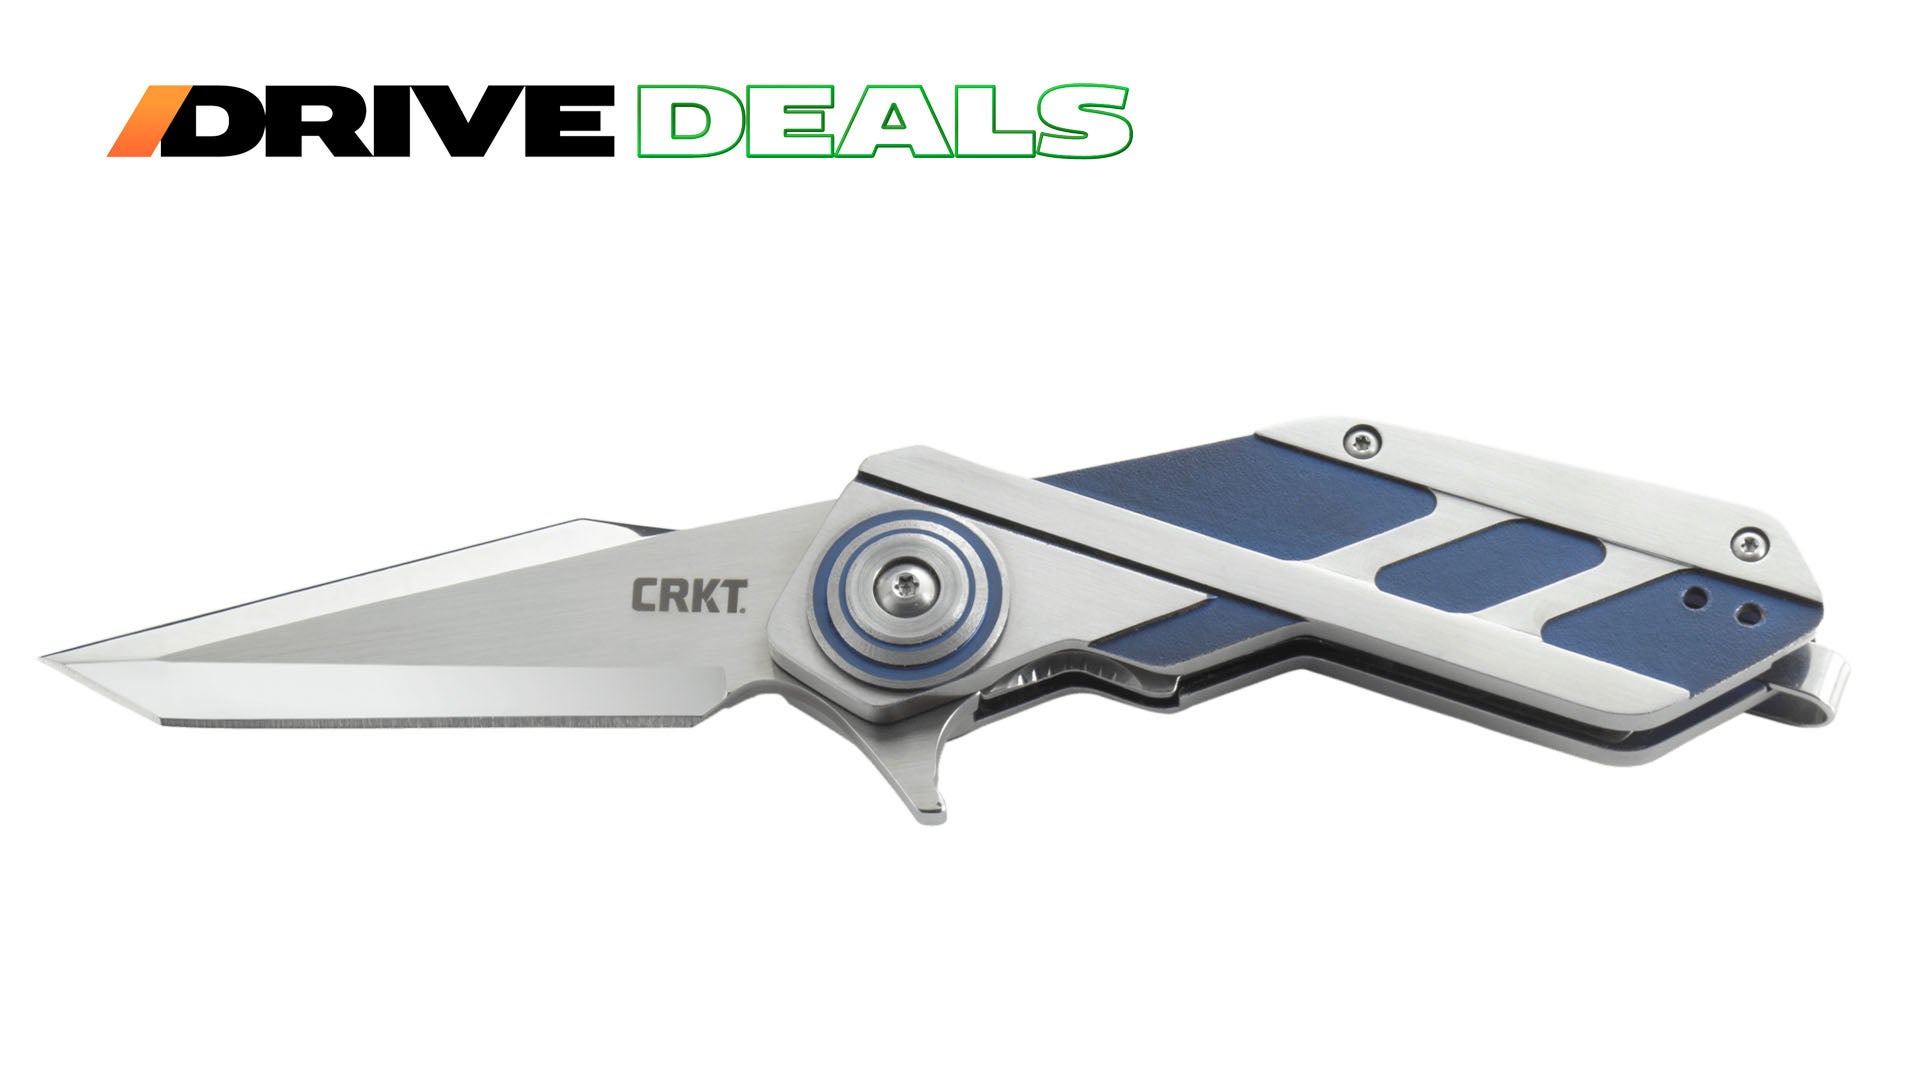 Prepare for Spring Adventures With BladeHQ’s EDC Knife Deals